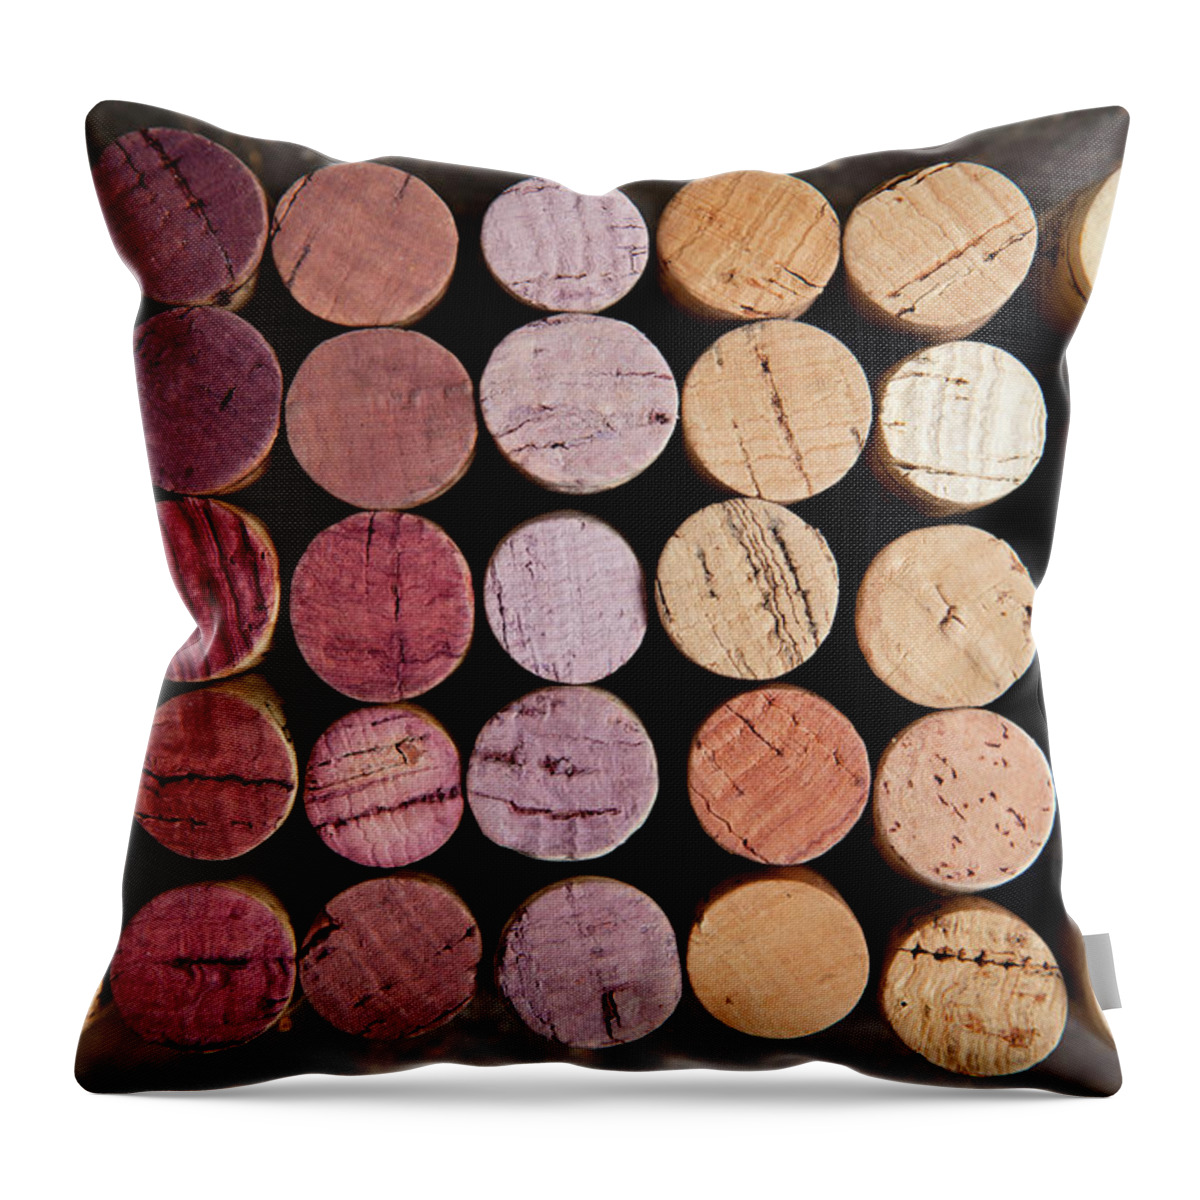 Wine Cork Throw Pillow featuring the photograph Wine Corks by Sematadesign